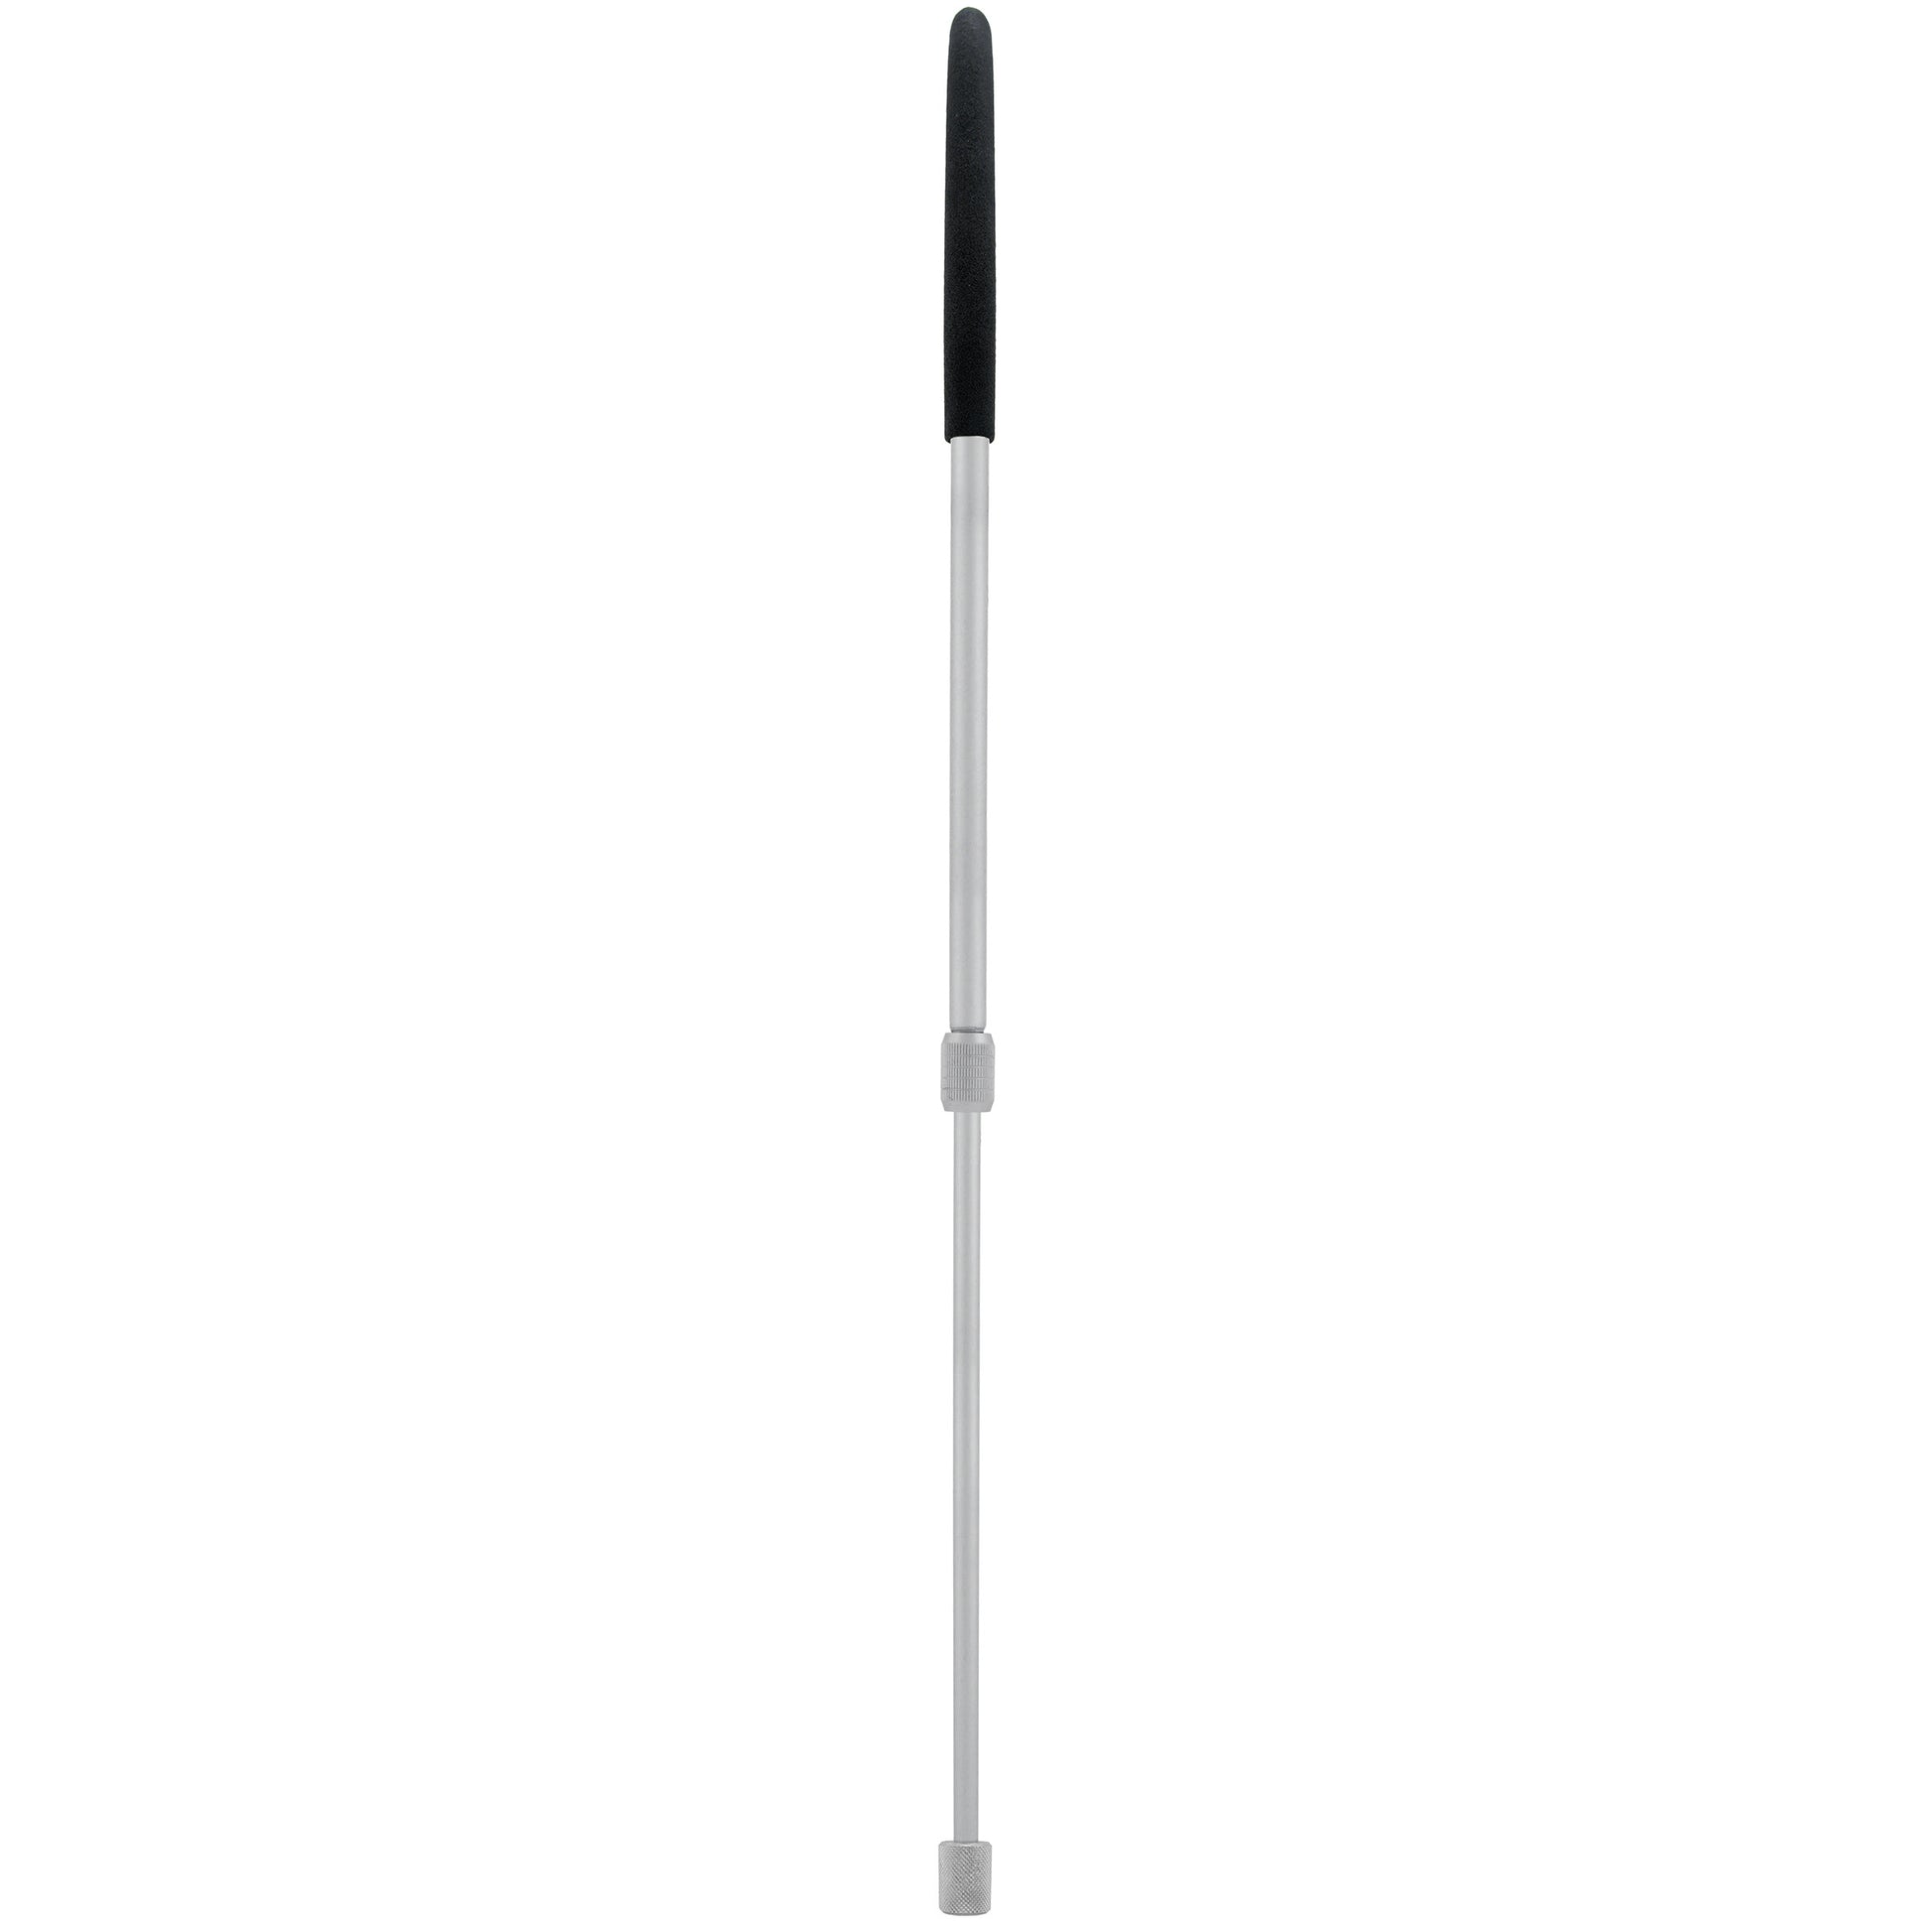 Load image into Gallery viewer, 07567 Extendable Magnetic Pick-Up Tool with Locking Nut - Top View